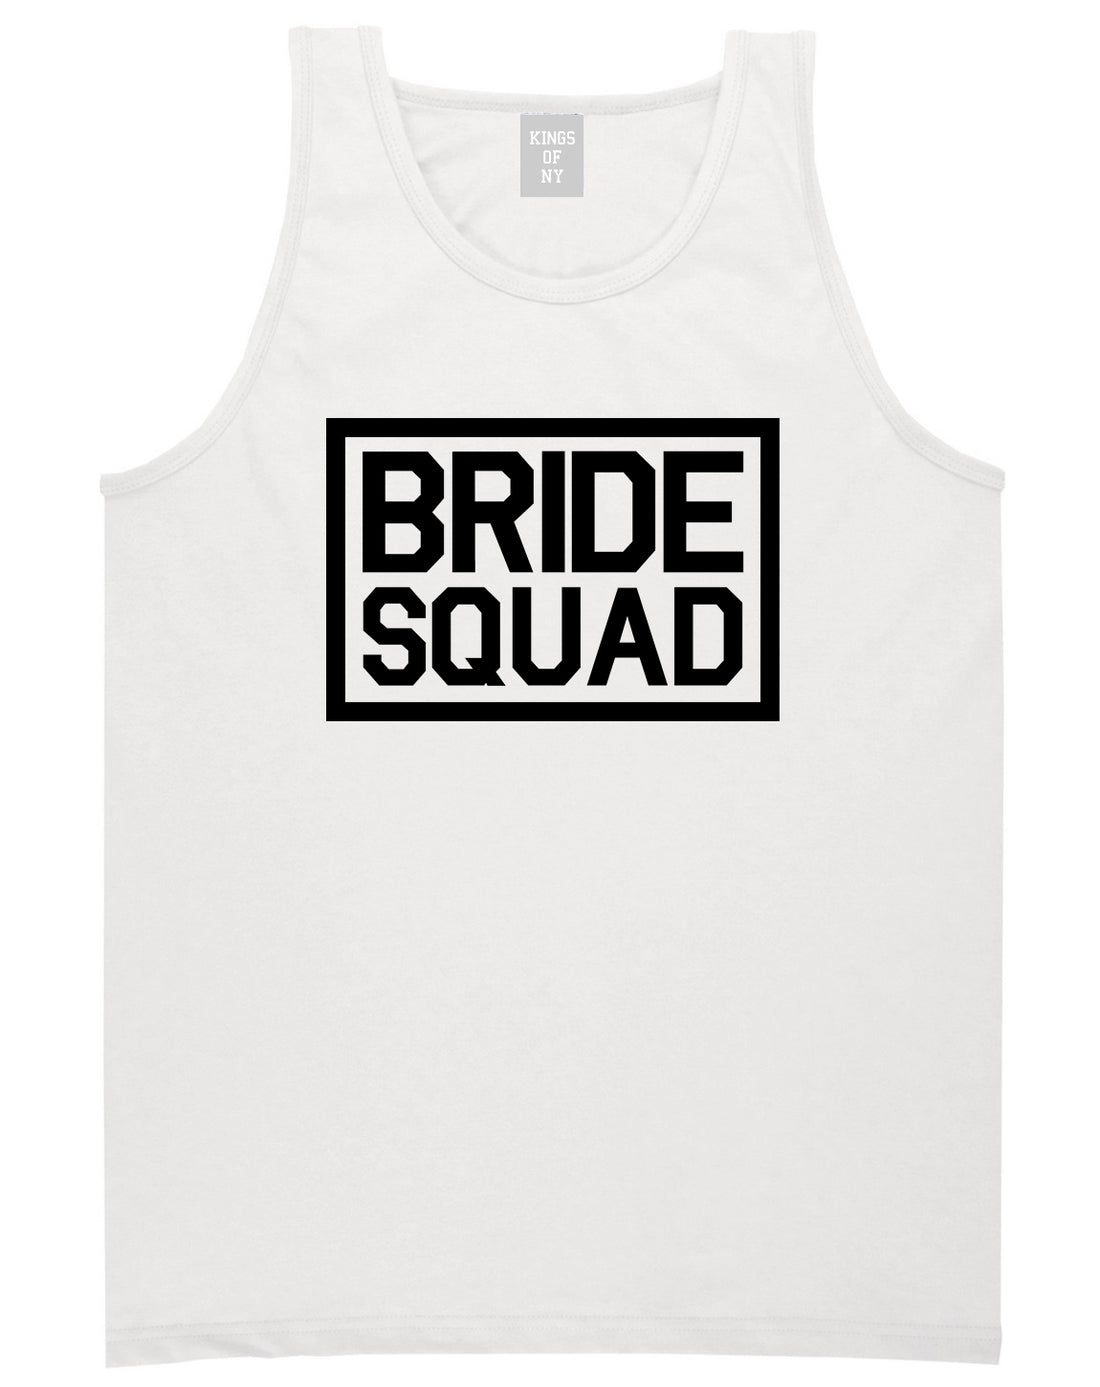 Bride Squad Bachlorette Party White Tank Top Shirt by Kings Of NY